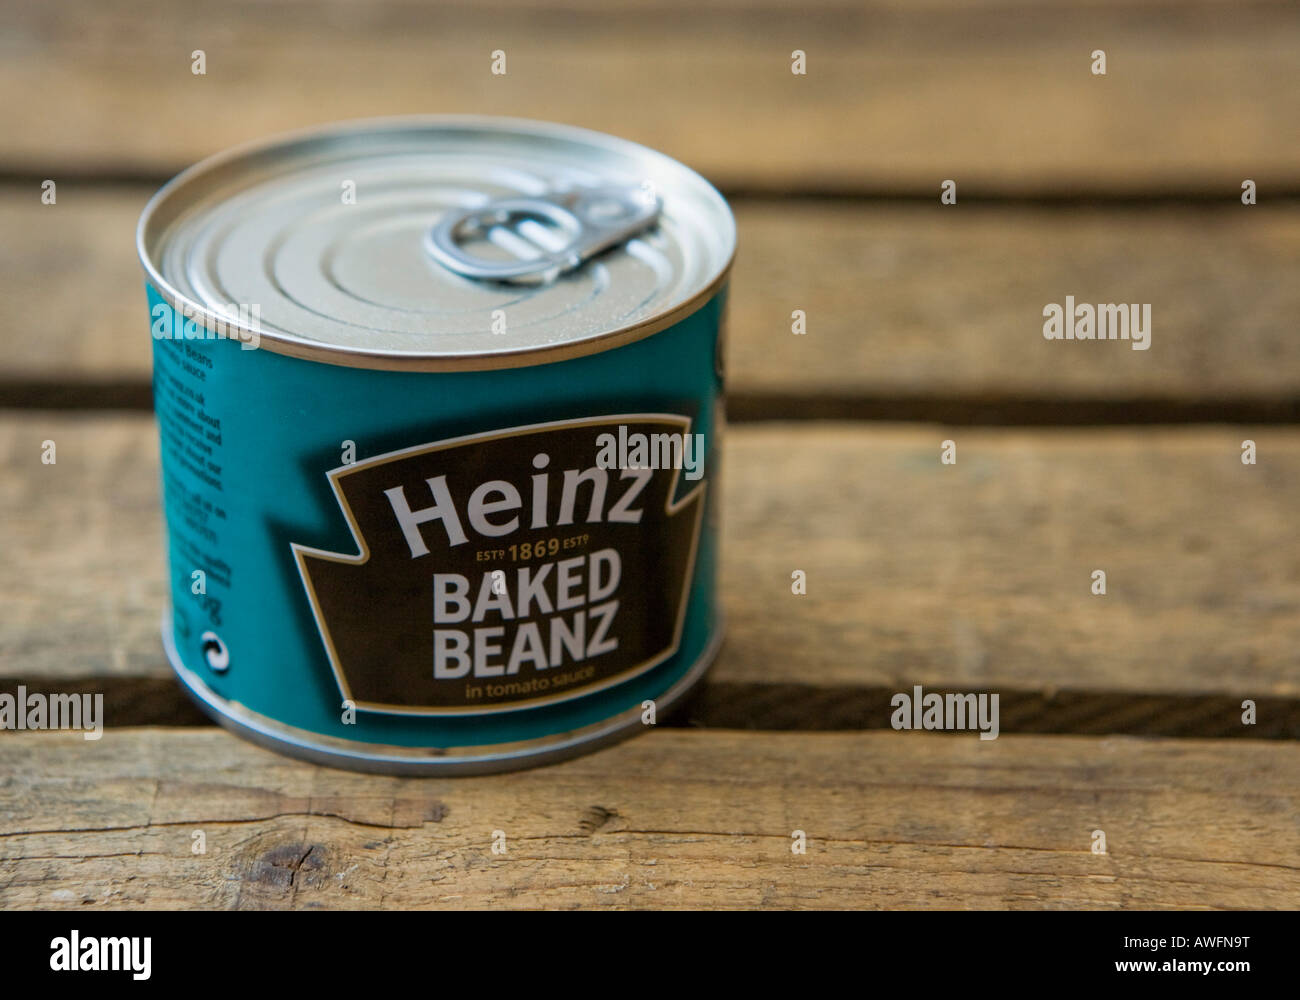 One can of Heinz Baked Beanz Stock Photo